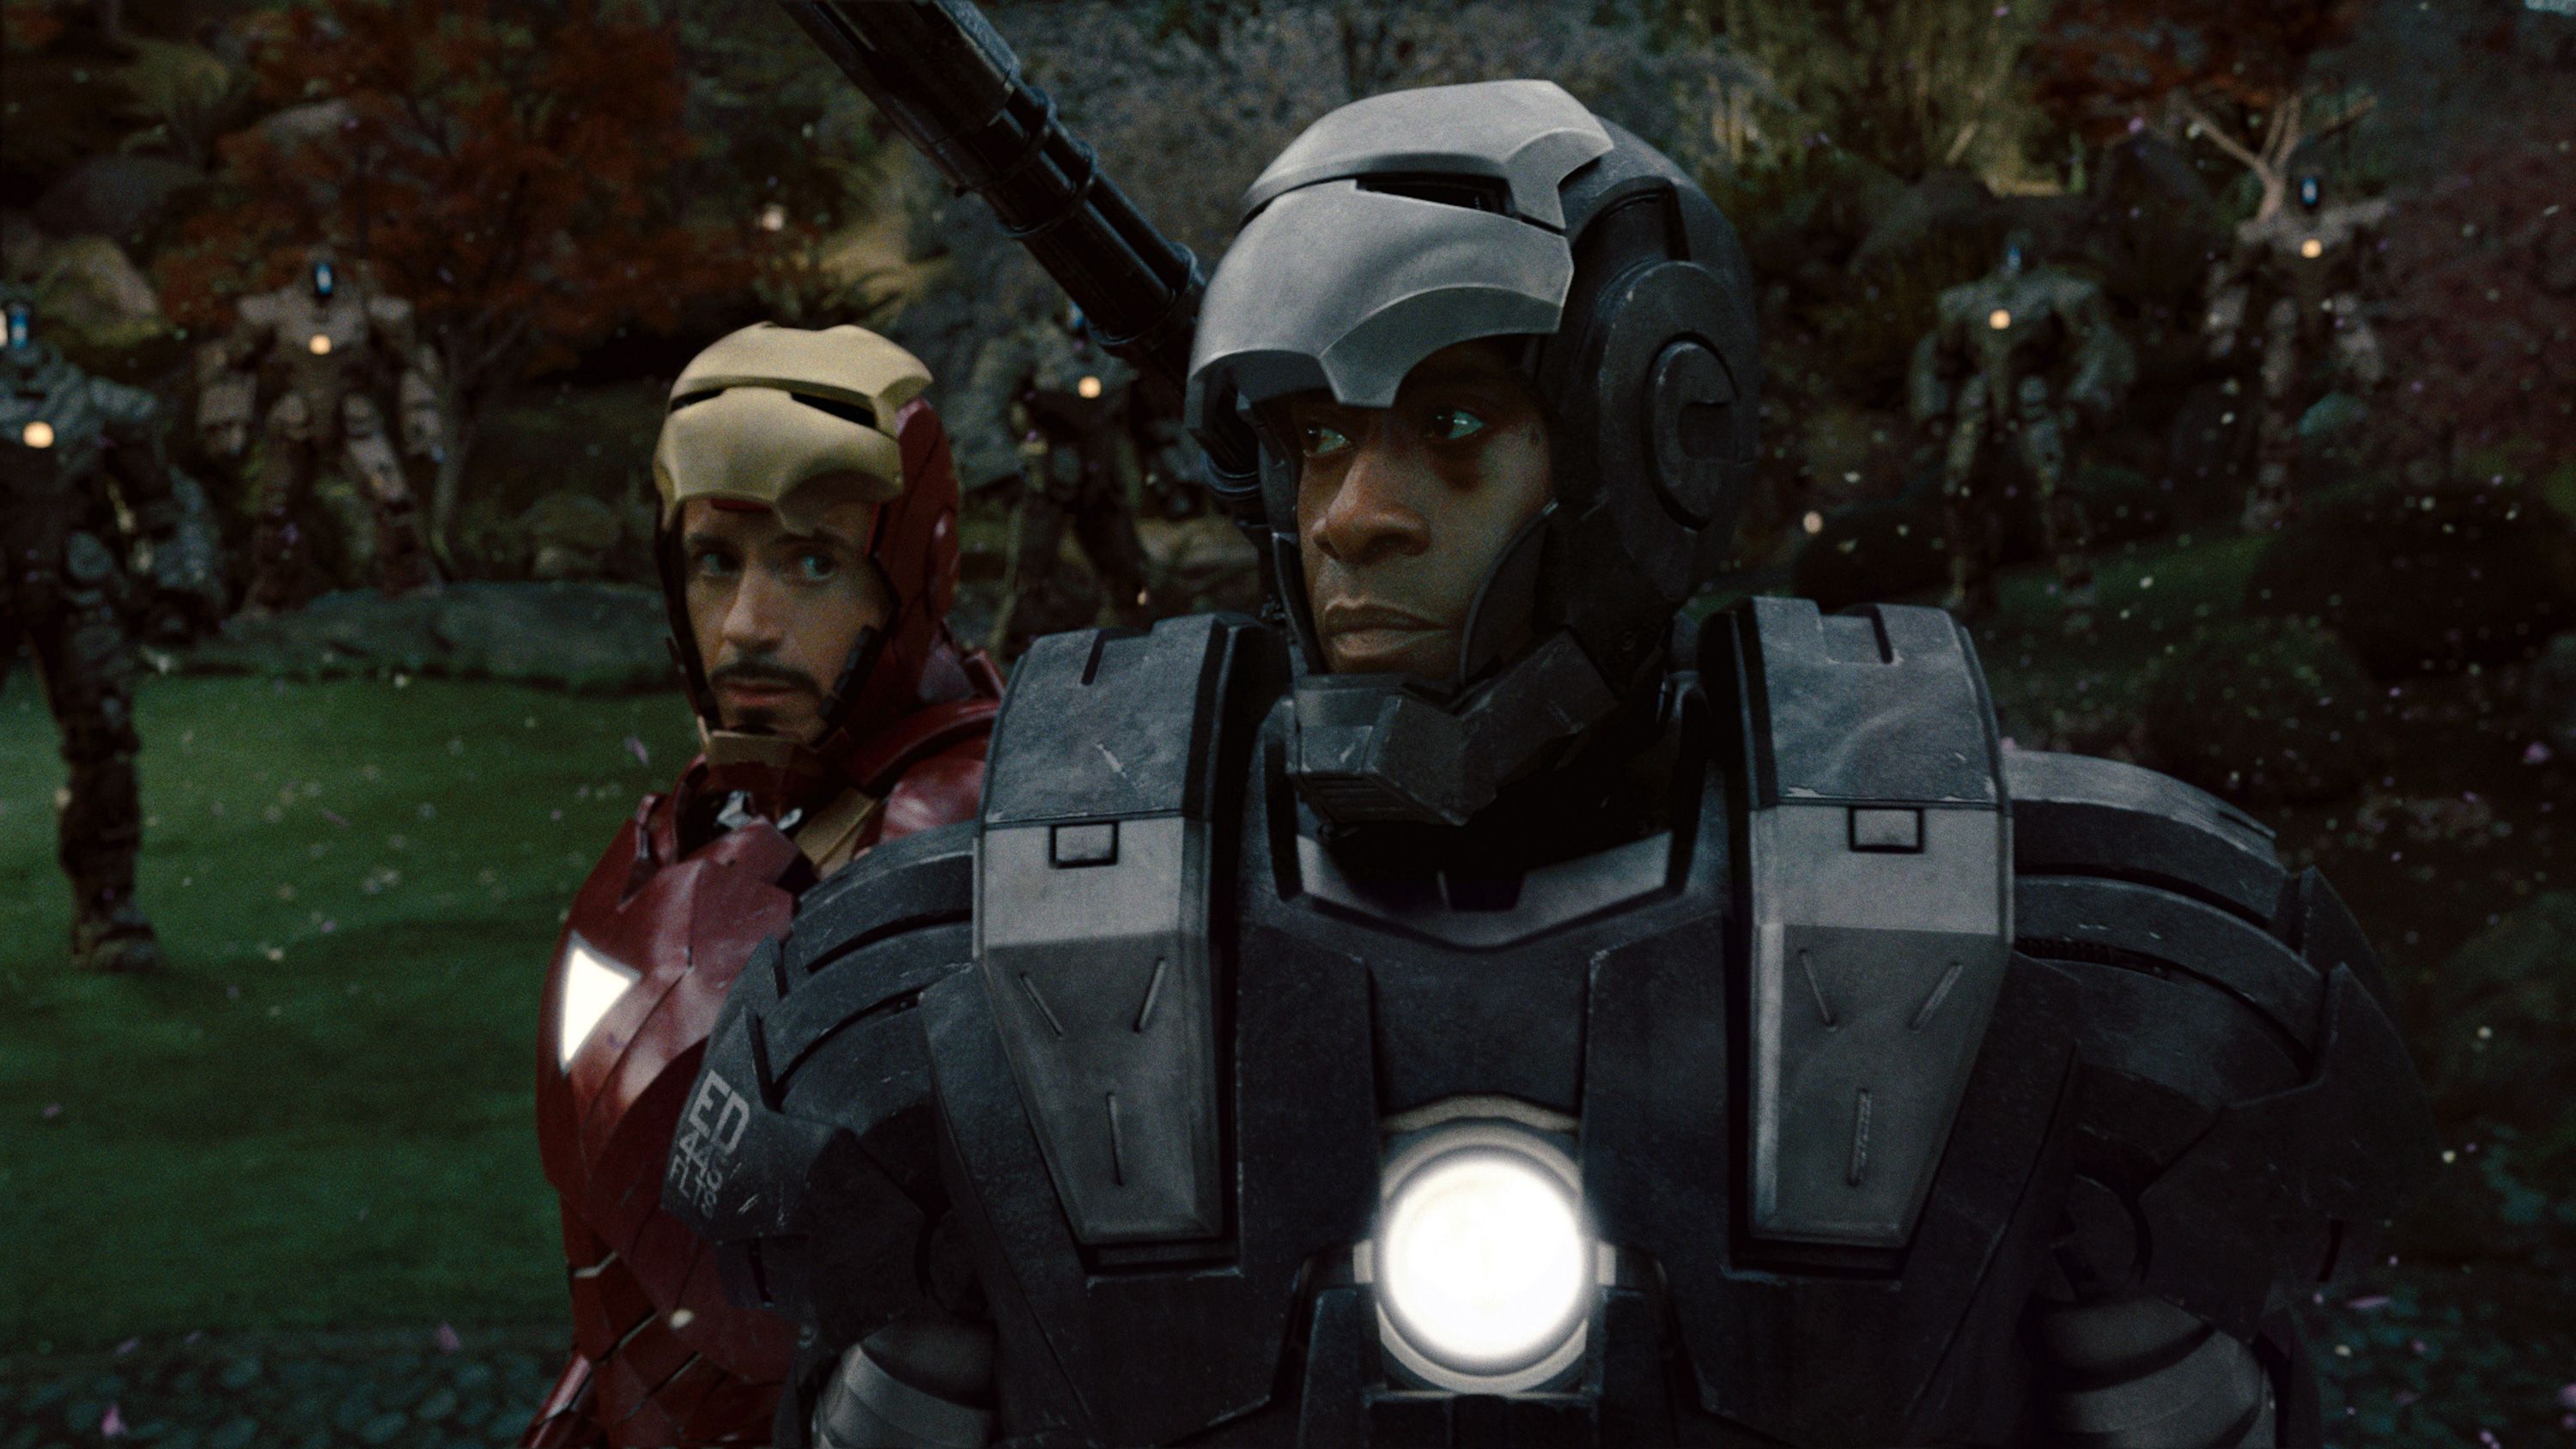 23 High Resolution Images From Iron Man 2